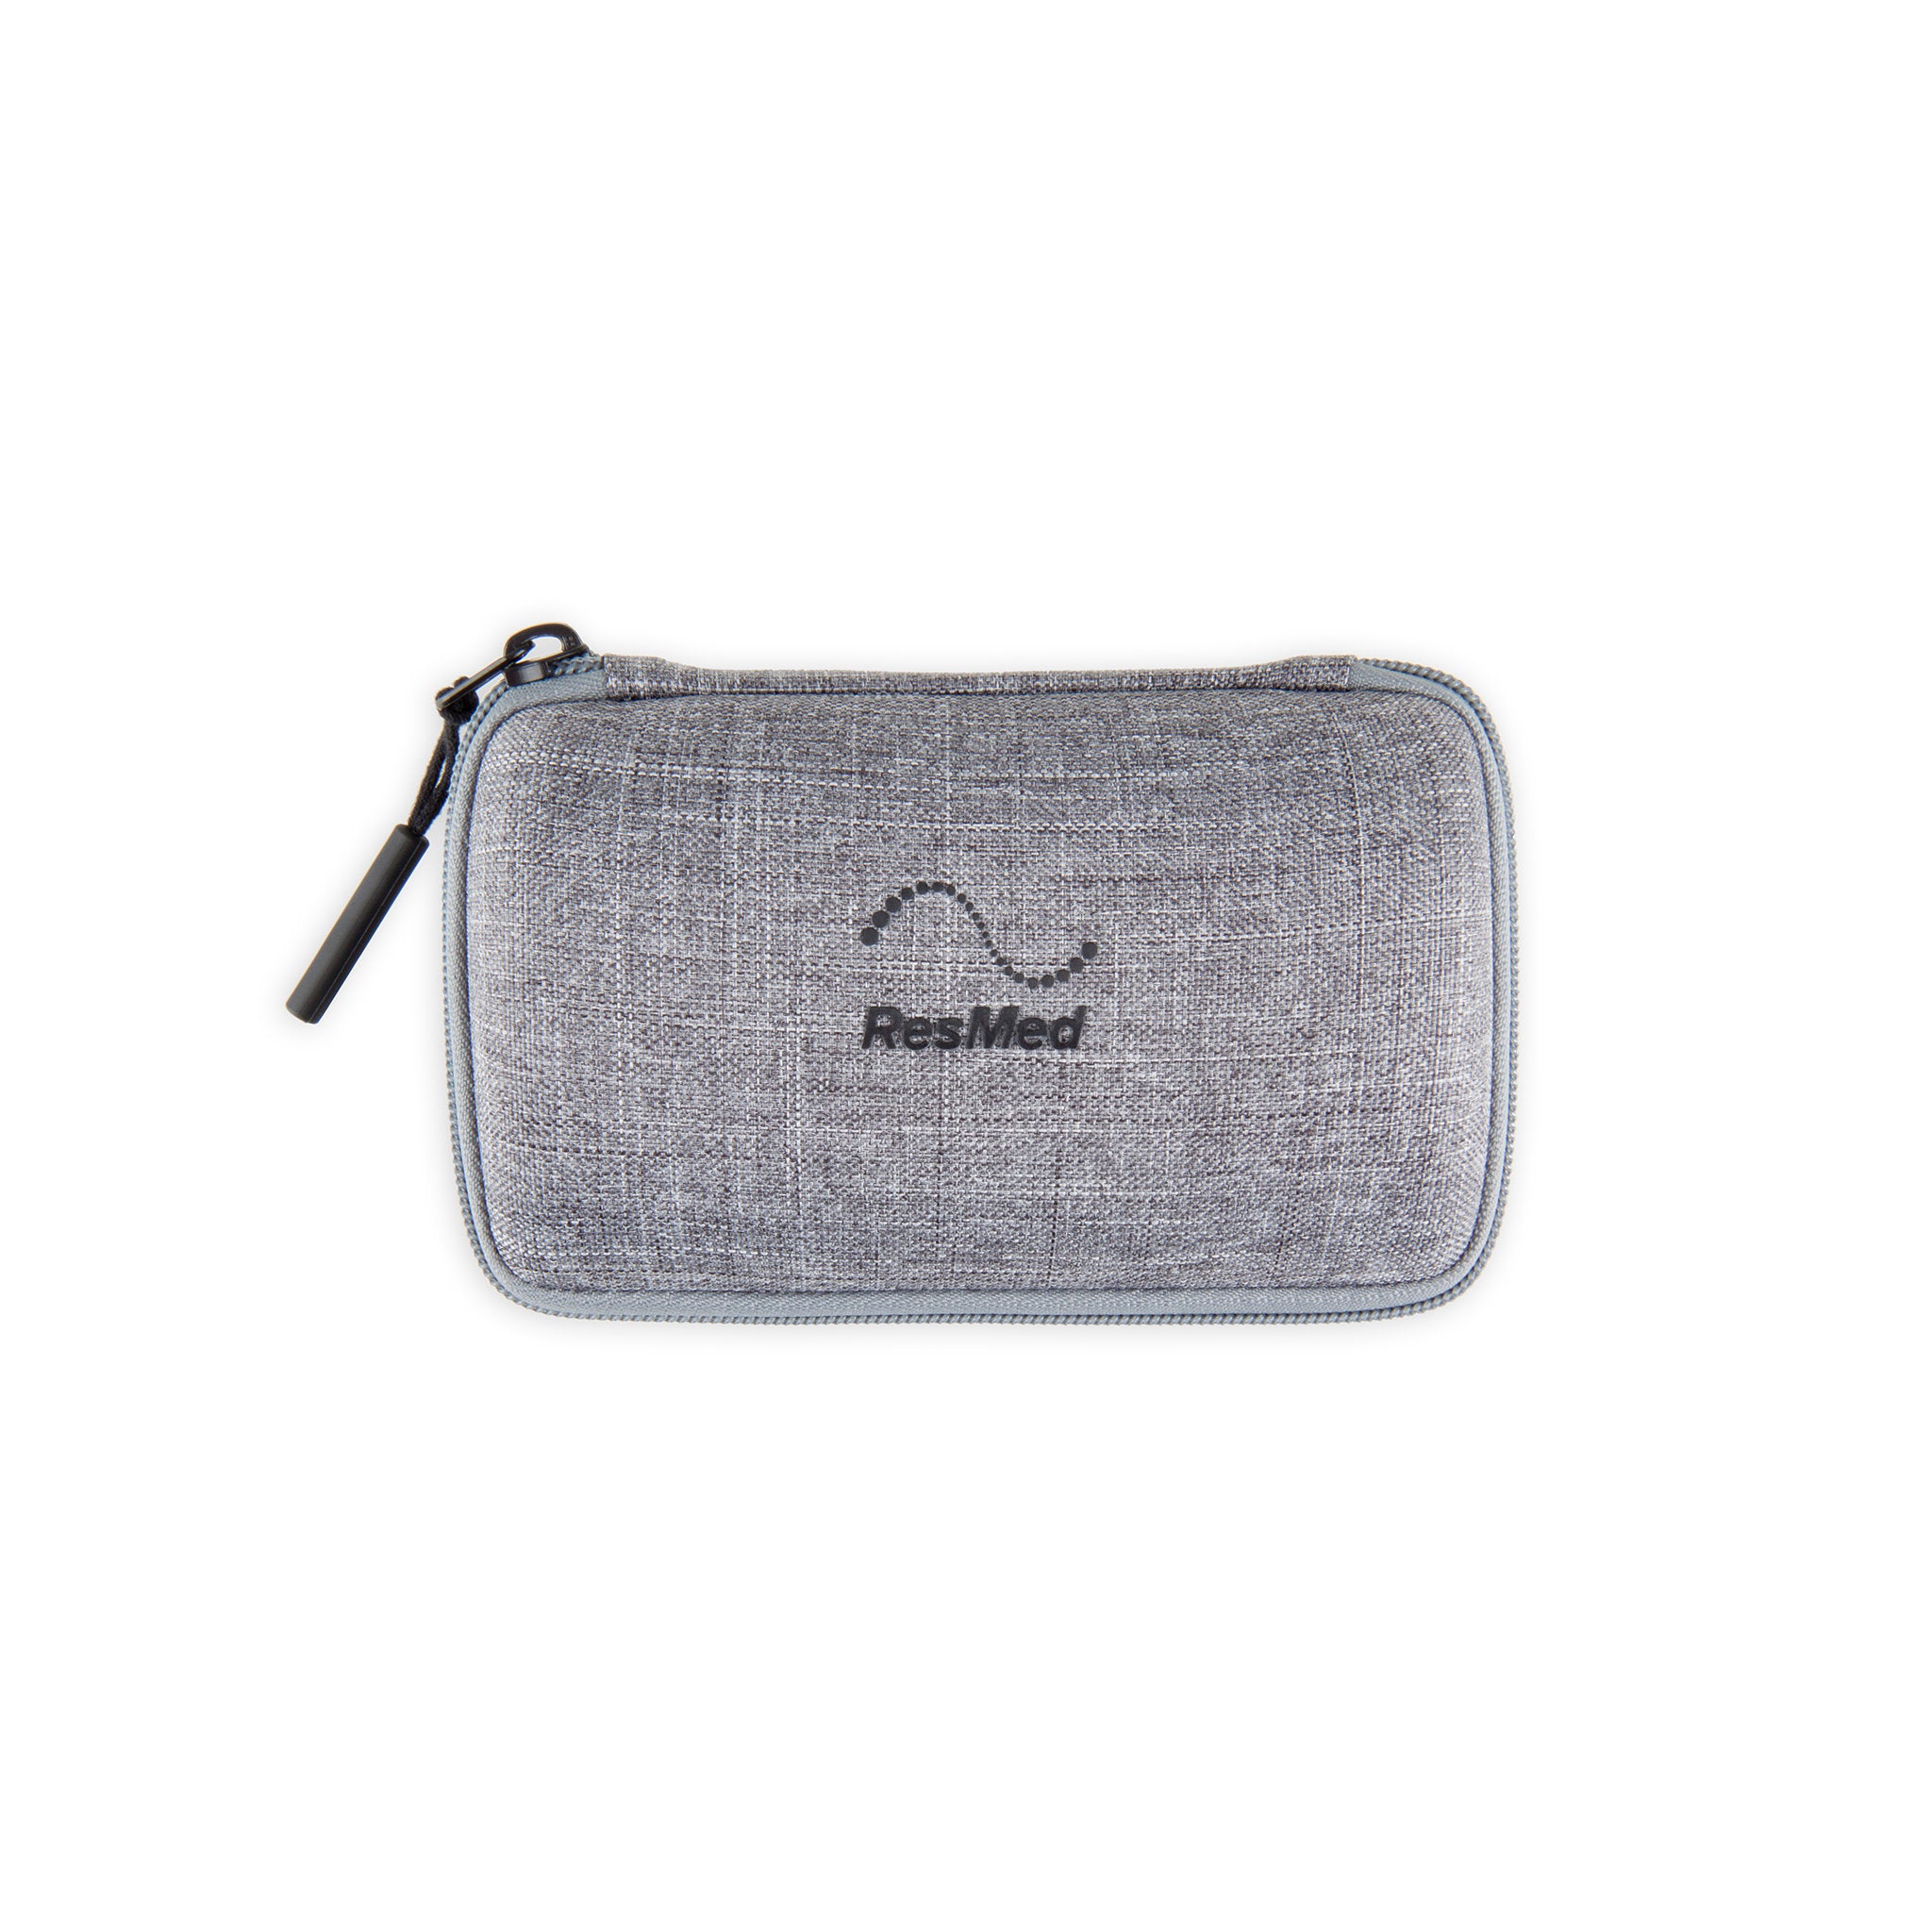 ResMed AirMini? Travel CPAP Protective Case